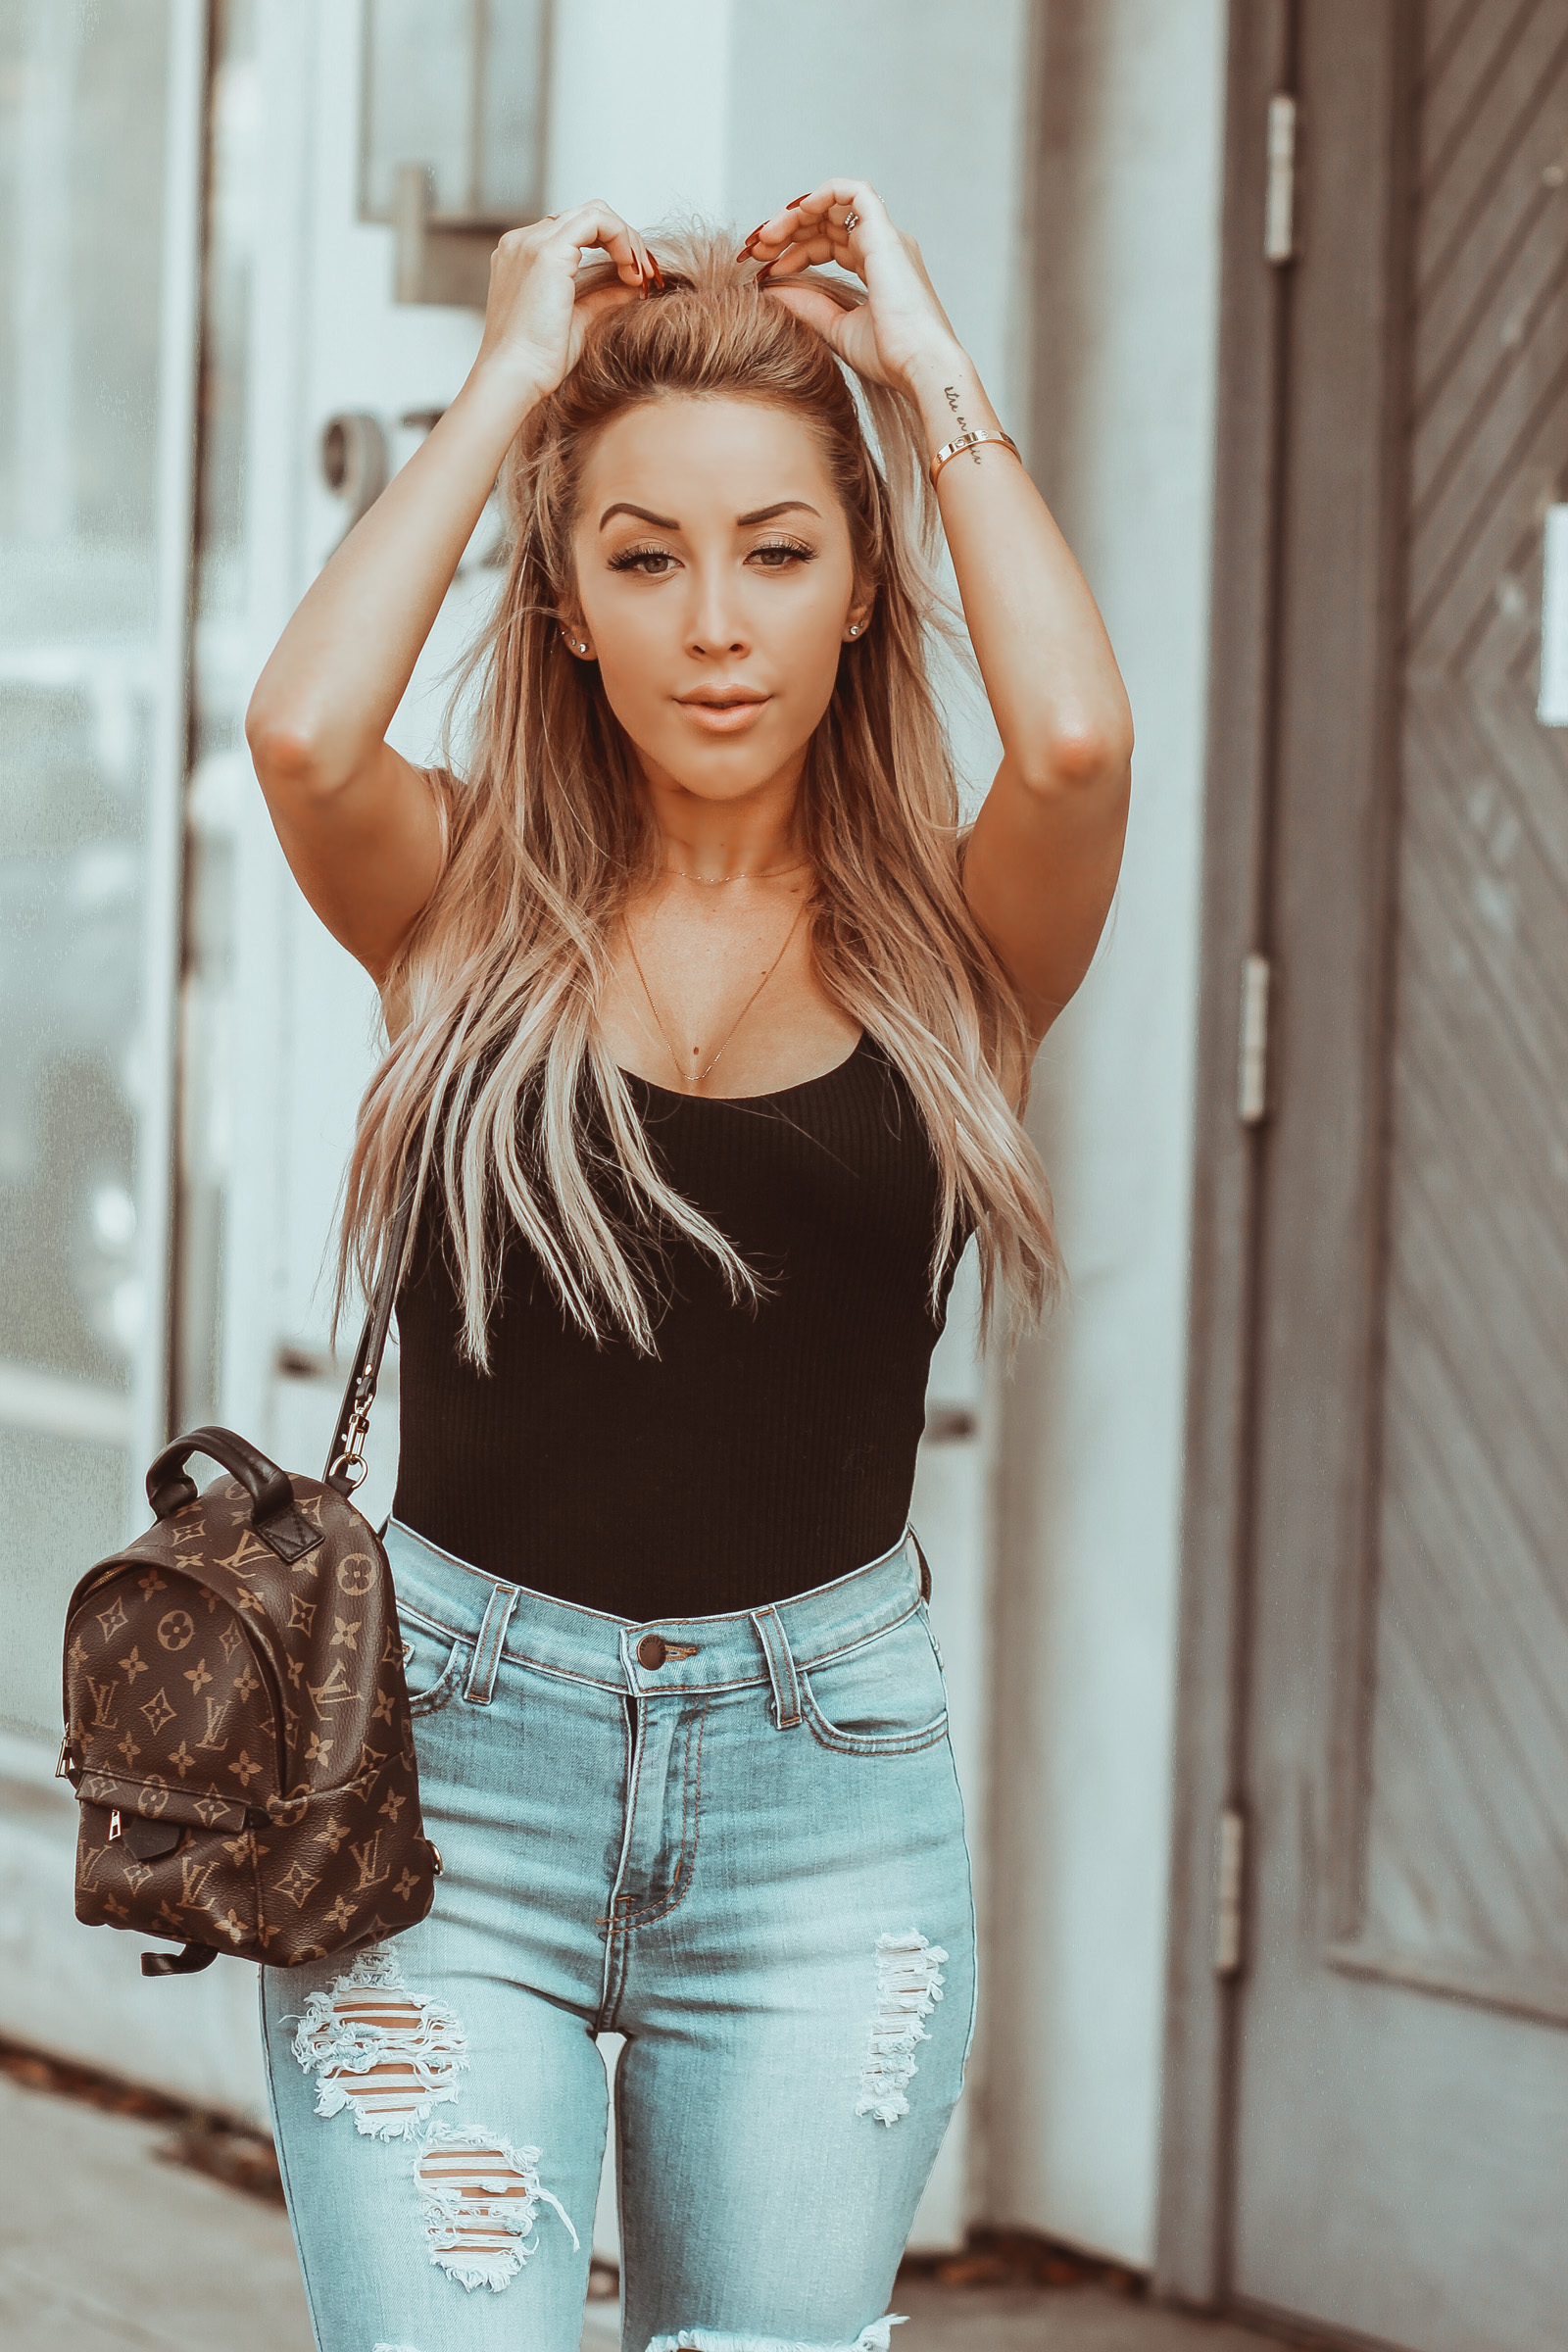 Black Bodysuit Revolve | Distressed Jeans | Louis Vuitton Palm Springs Backpack | Hair Half Up Half Down | Gucci Mules | Blondie in the City by Hayley Larue